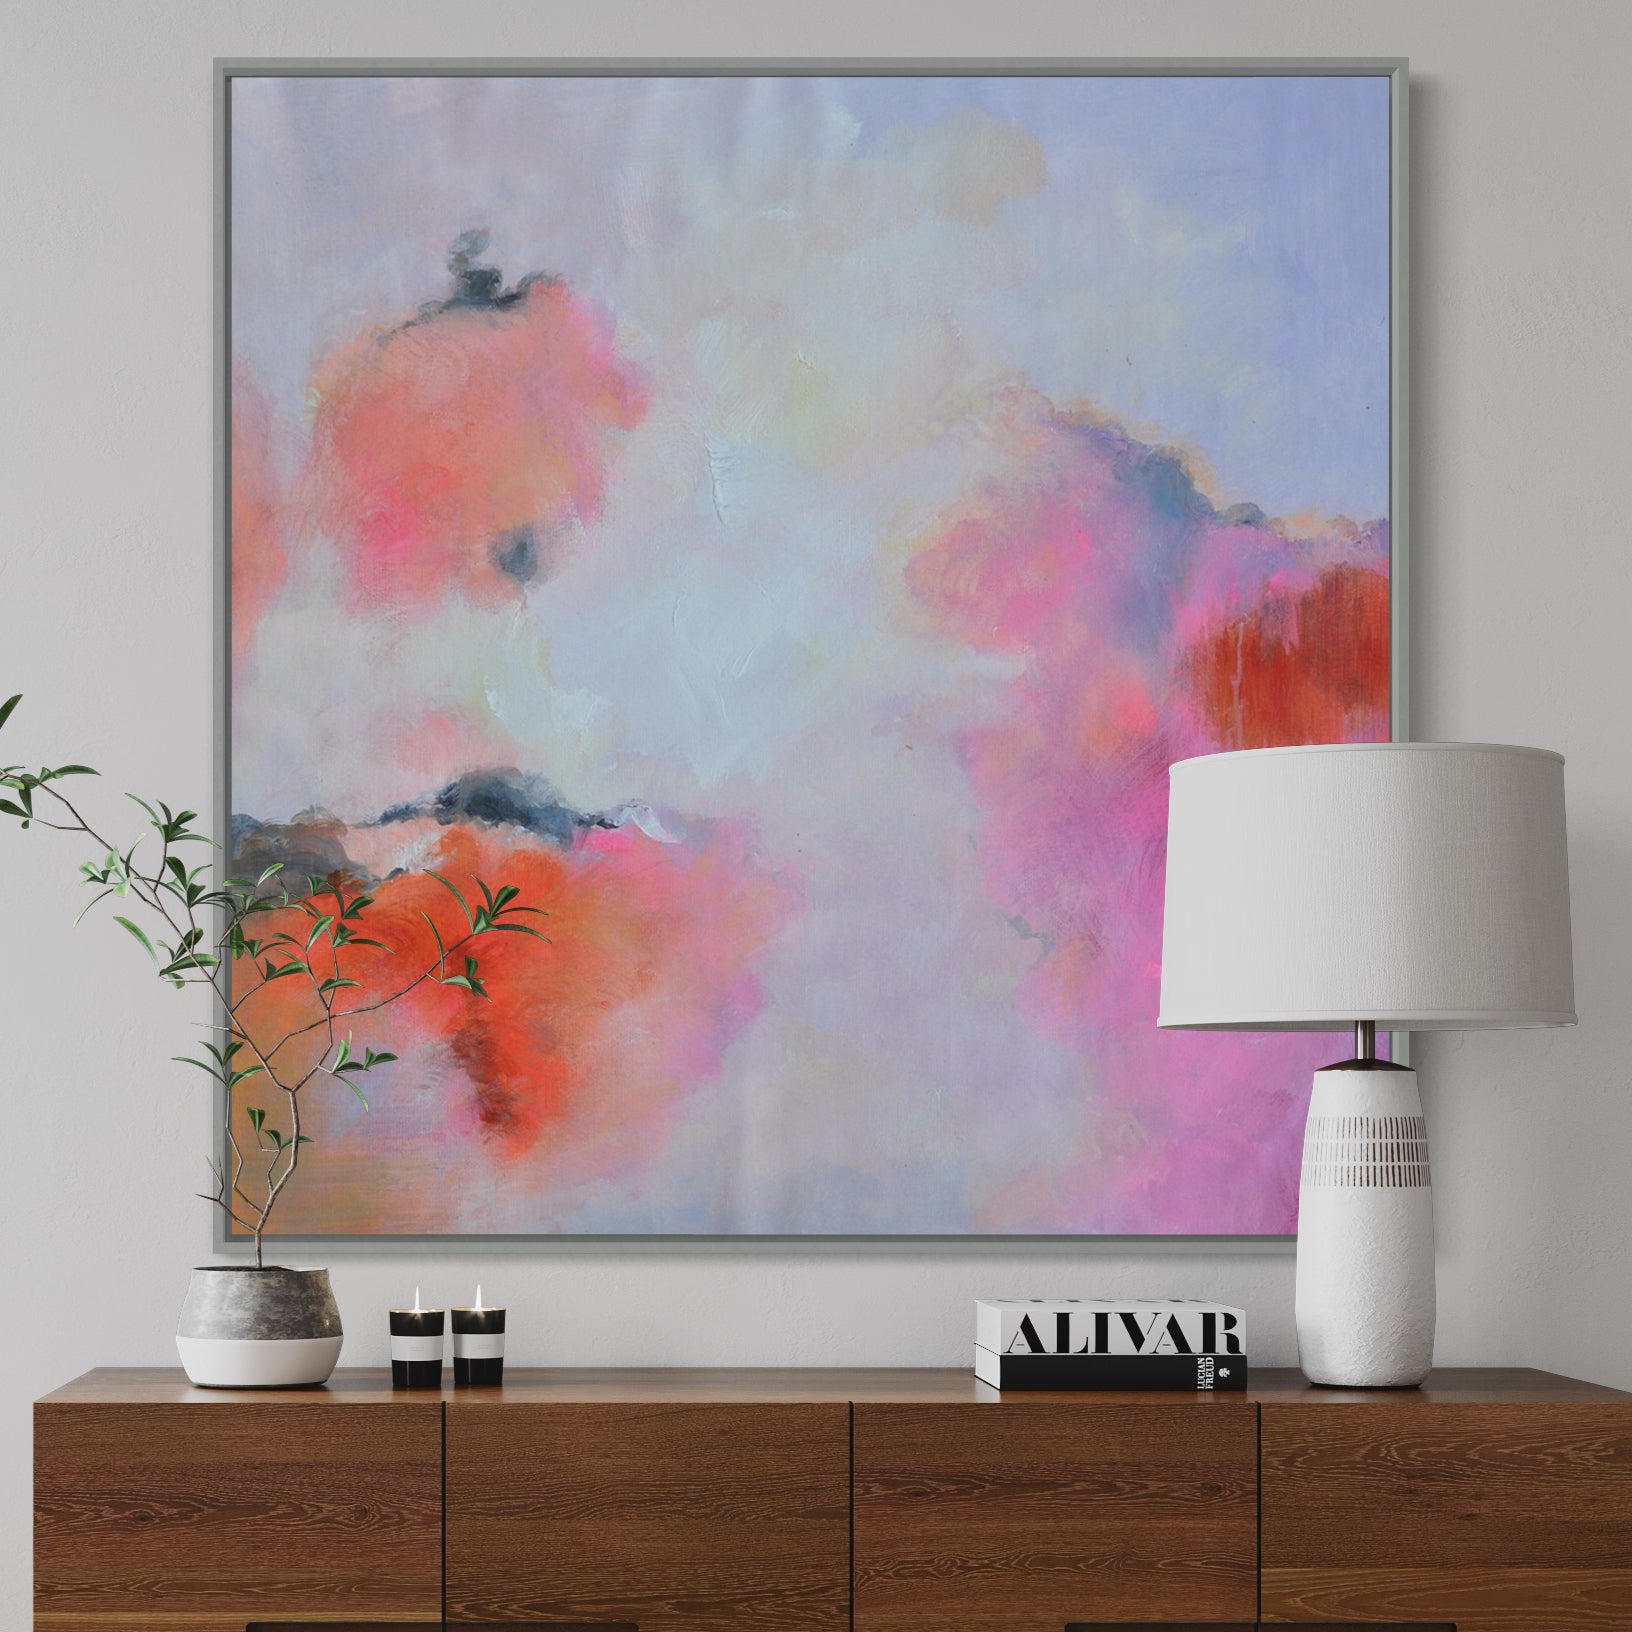 Cotton Candy, Black And Golden / 70x70cm